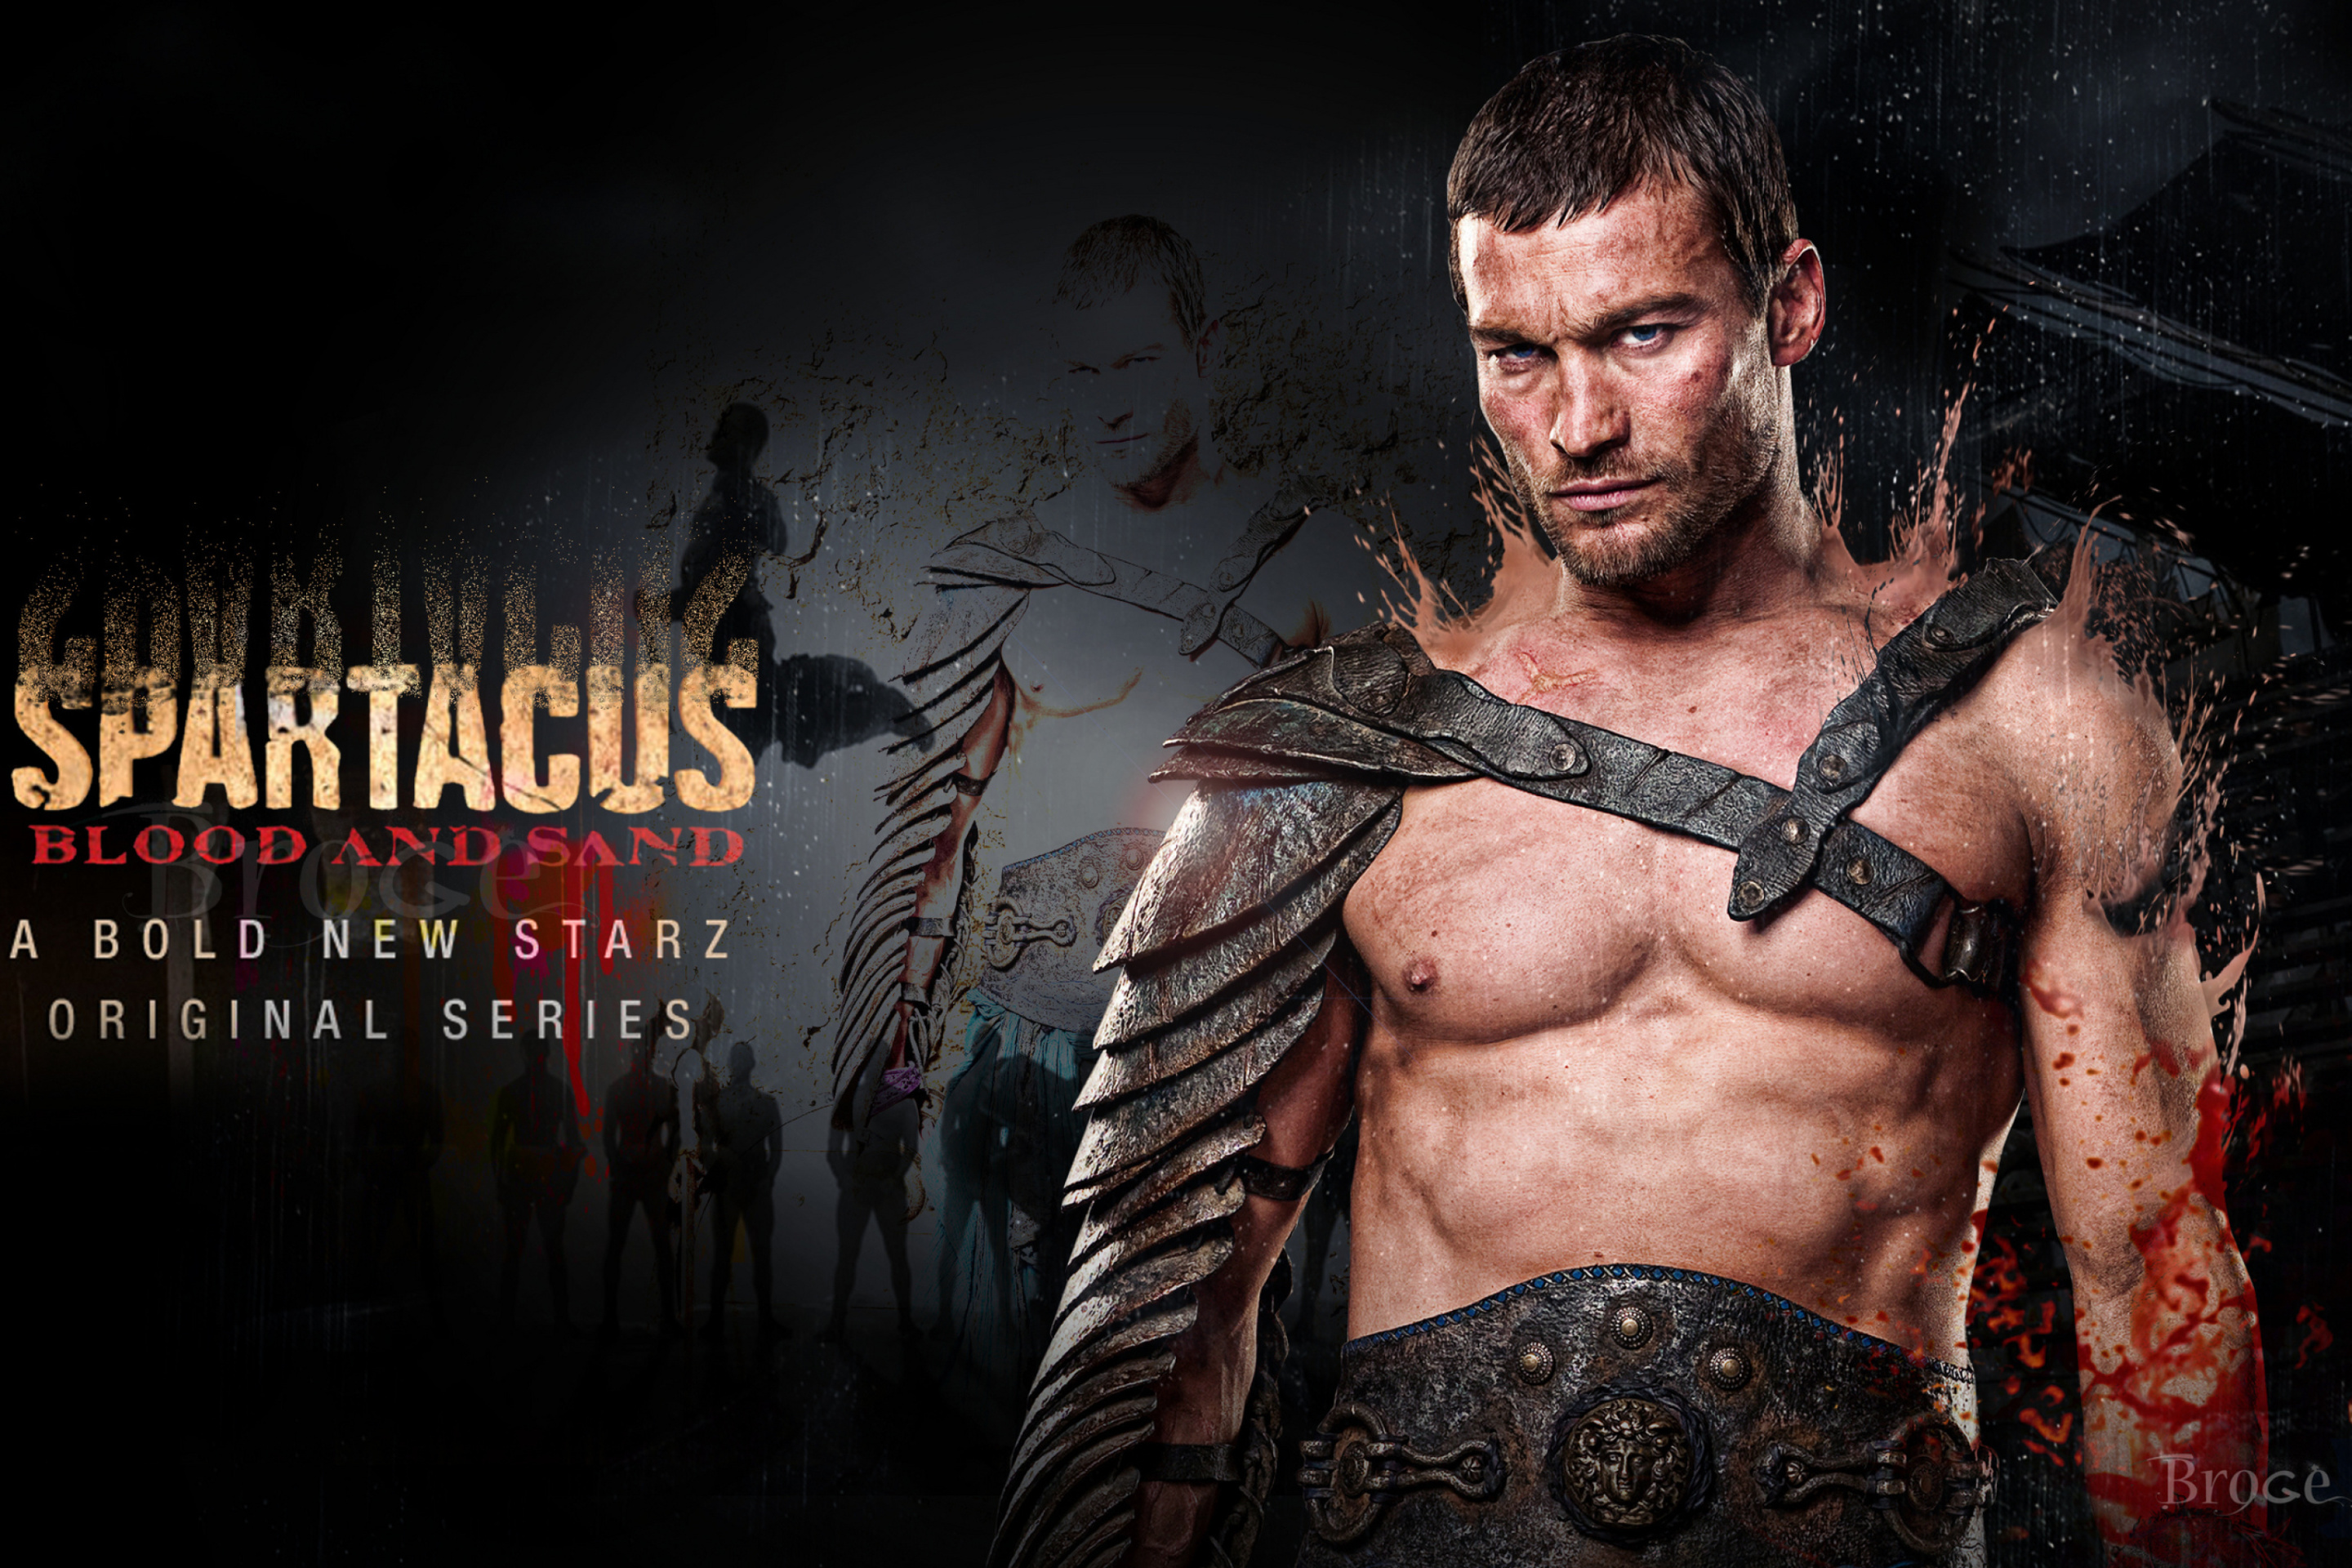 Sfondi Spartacus War of the Damned 2880x1920